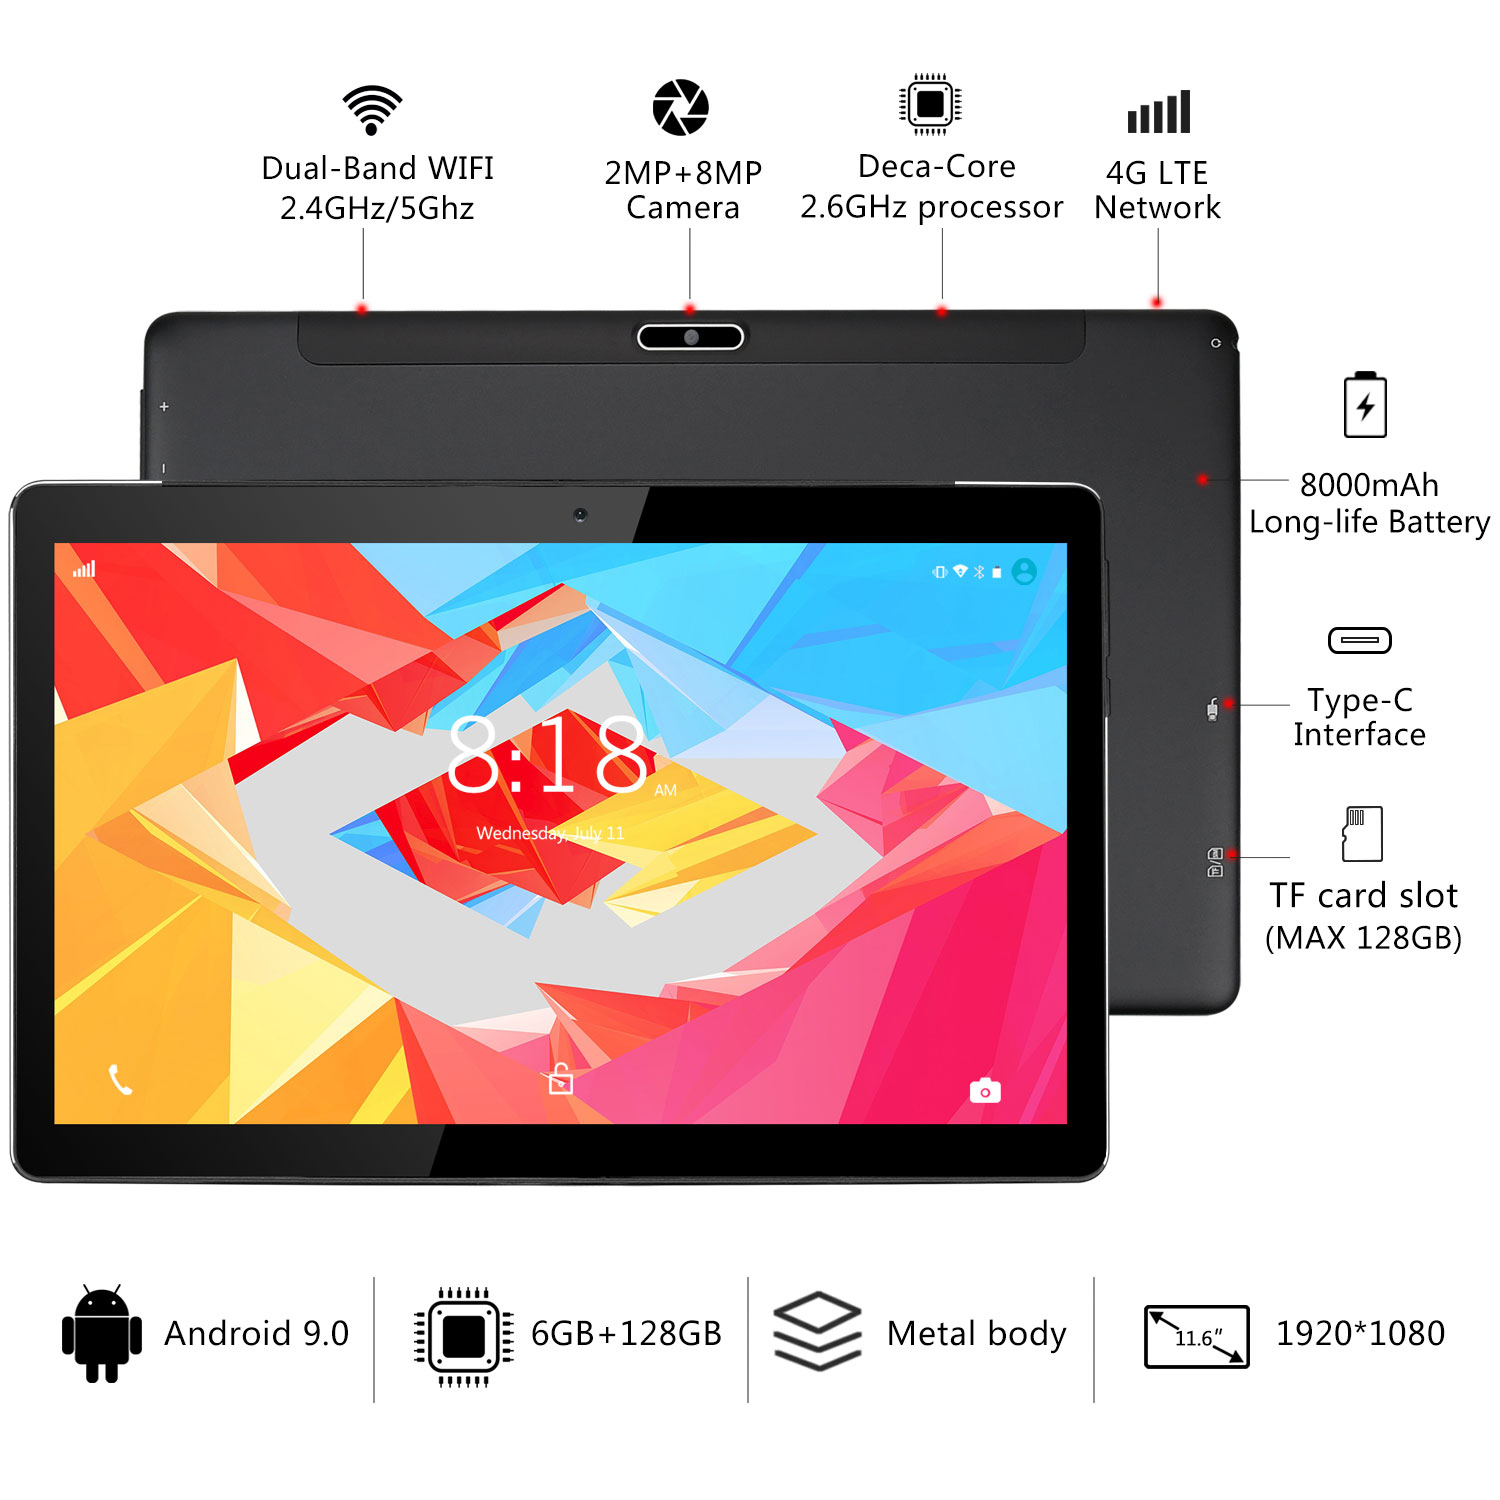 X116 Tablet PC 2 in 1 11.6 Inch, 6GB of RAM and 128GB Memory Tablet 10 Cores Processor Android 9.0 Tablet 8000mAh Battery and 1920 * 1080 FHD IPS, Dual 4G and Dual Band WiFi, HDMI (Black)